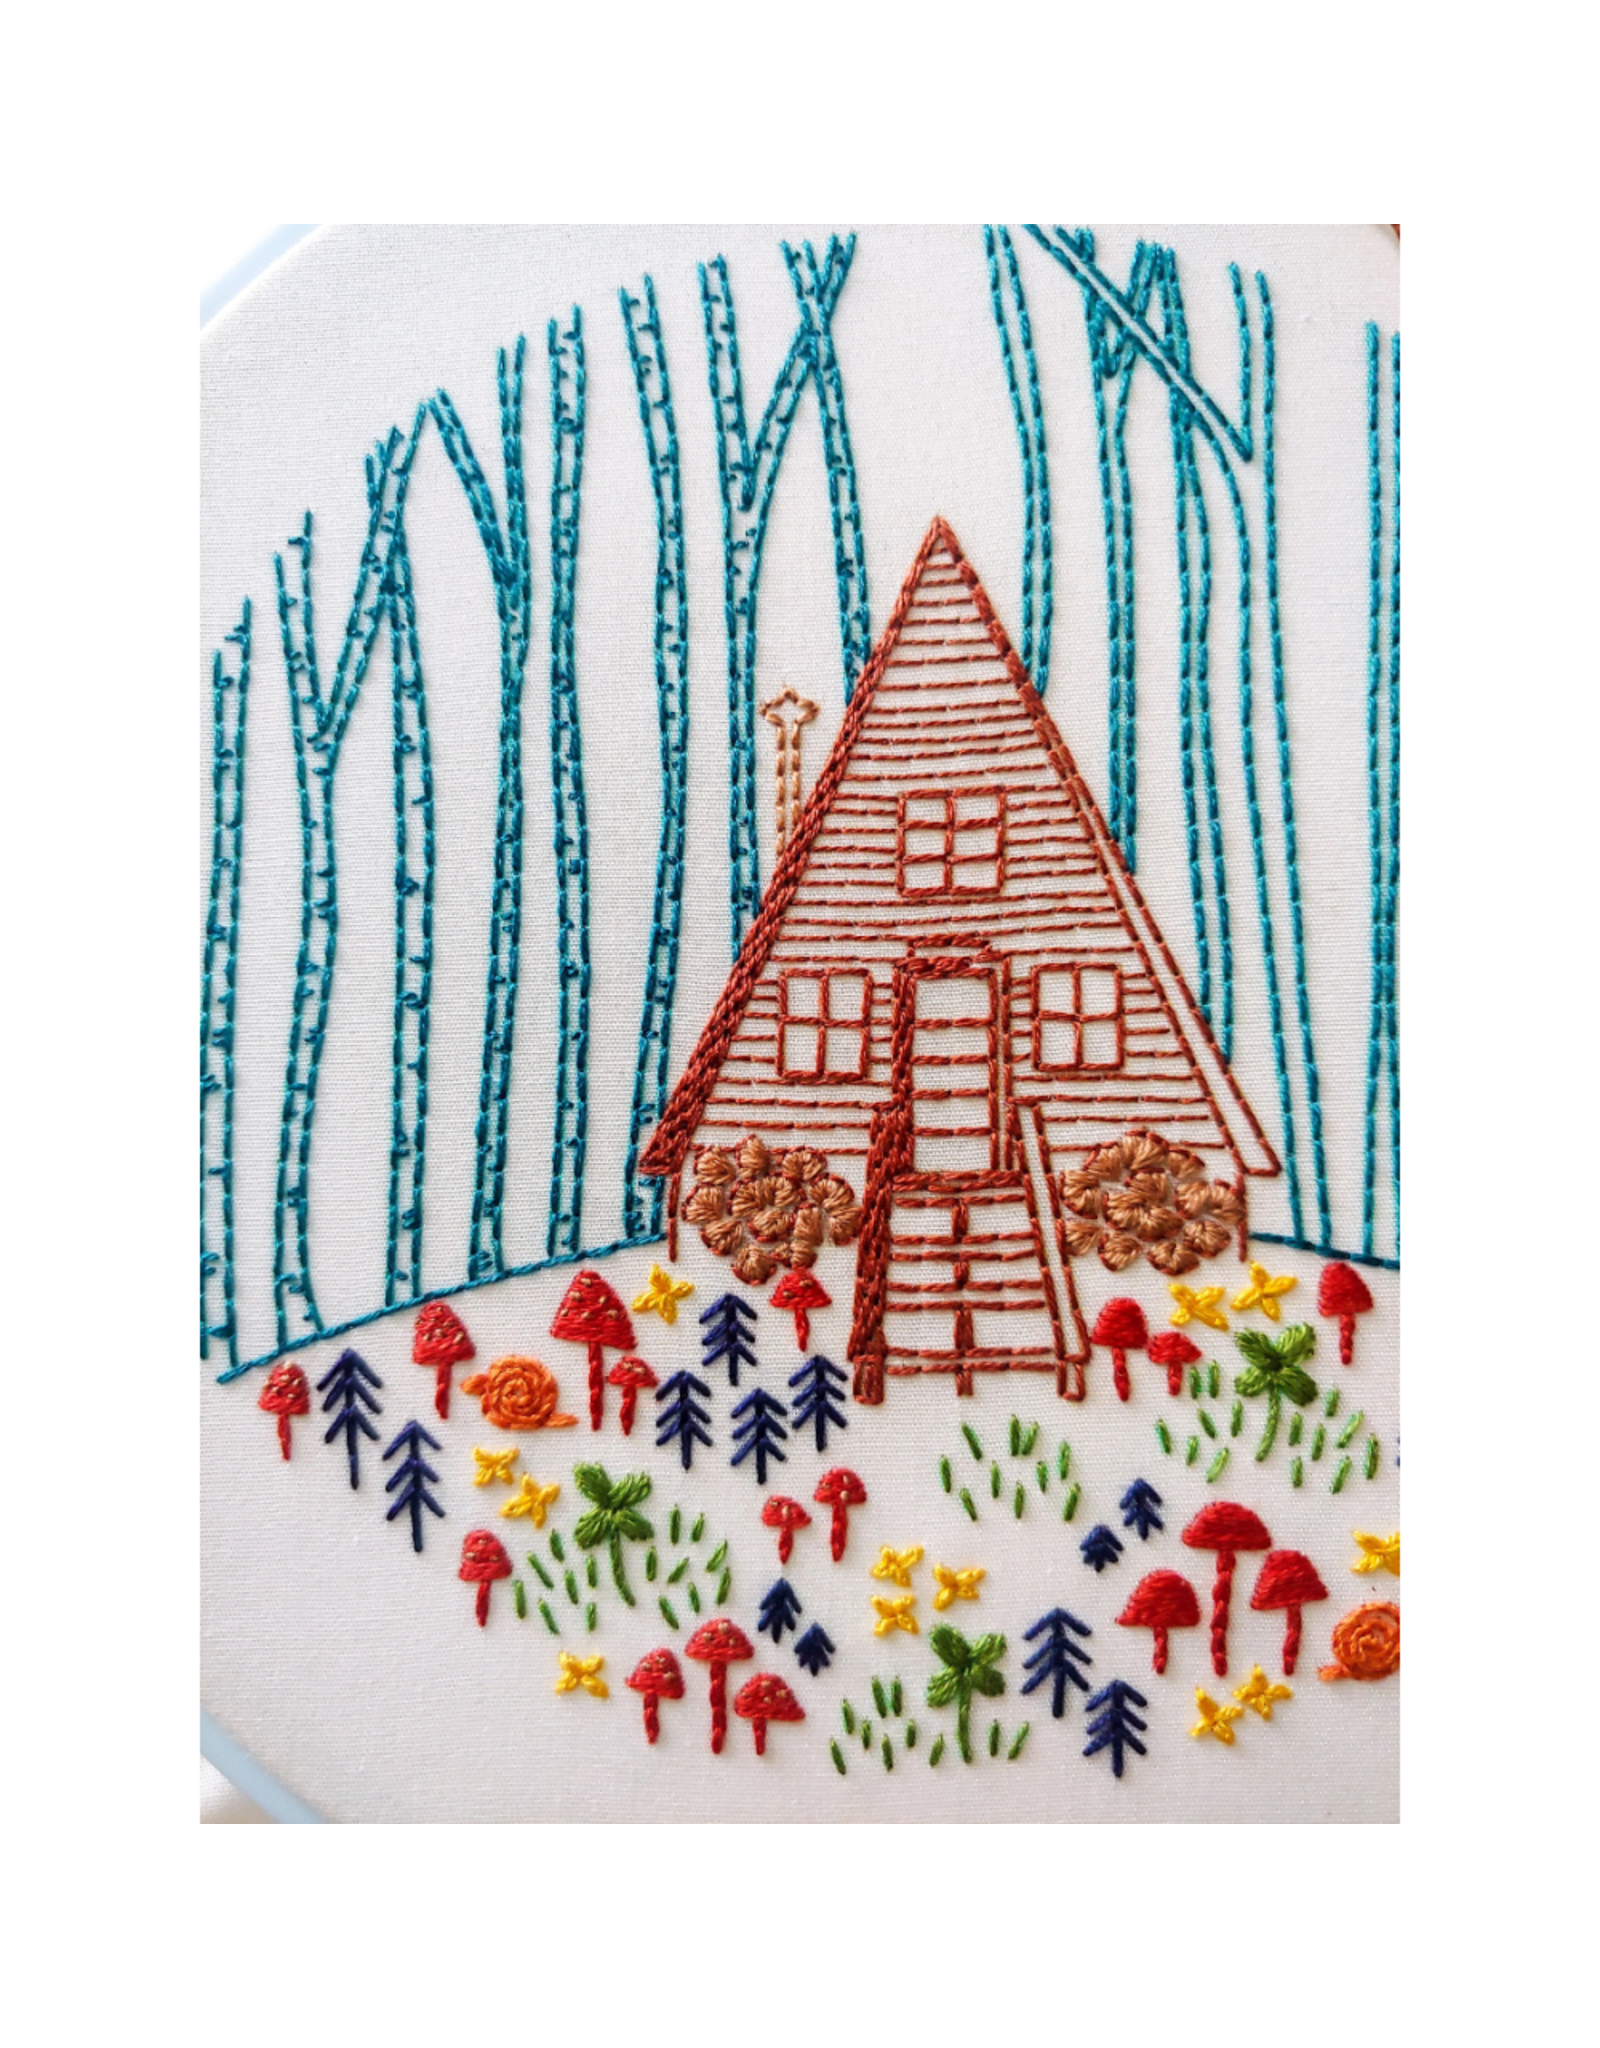 cozyblue Cozy Cabin Embroidery Kit from cozyblue